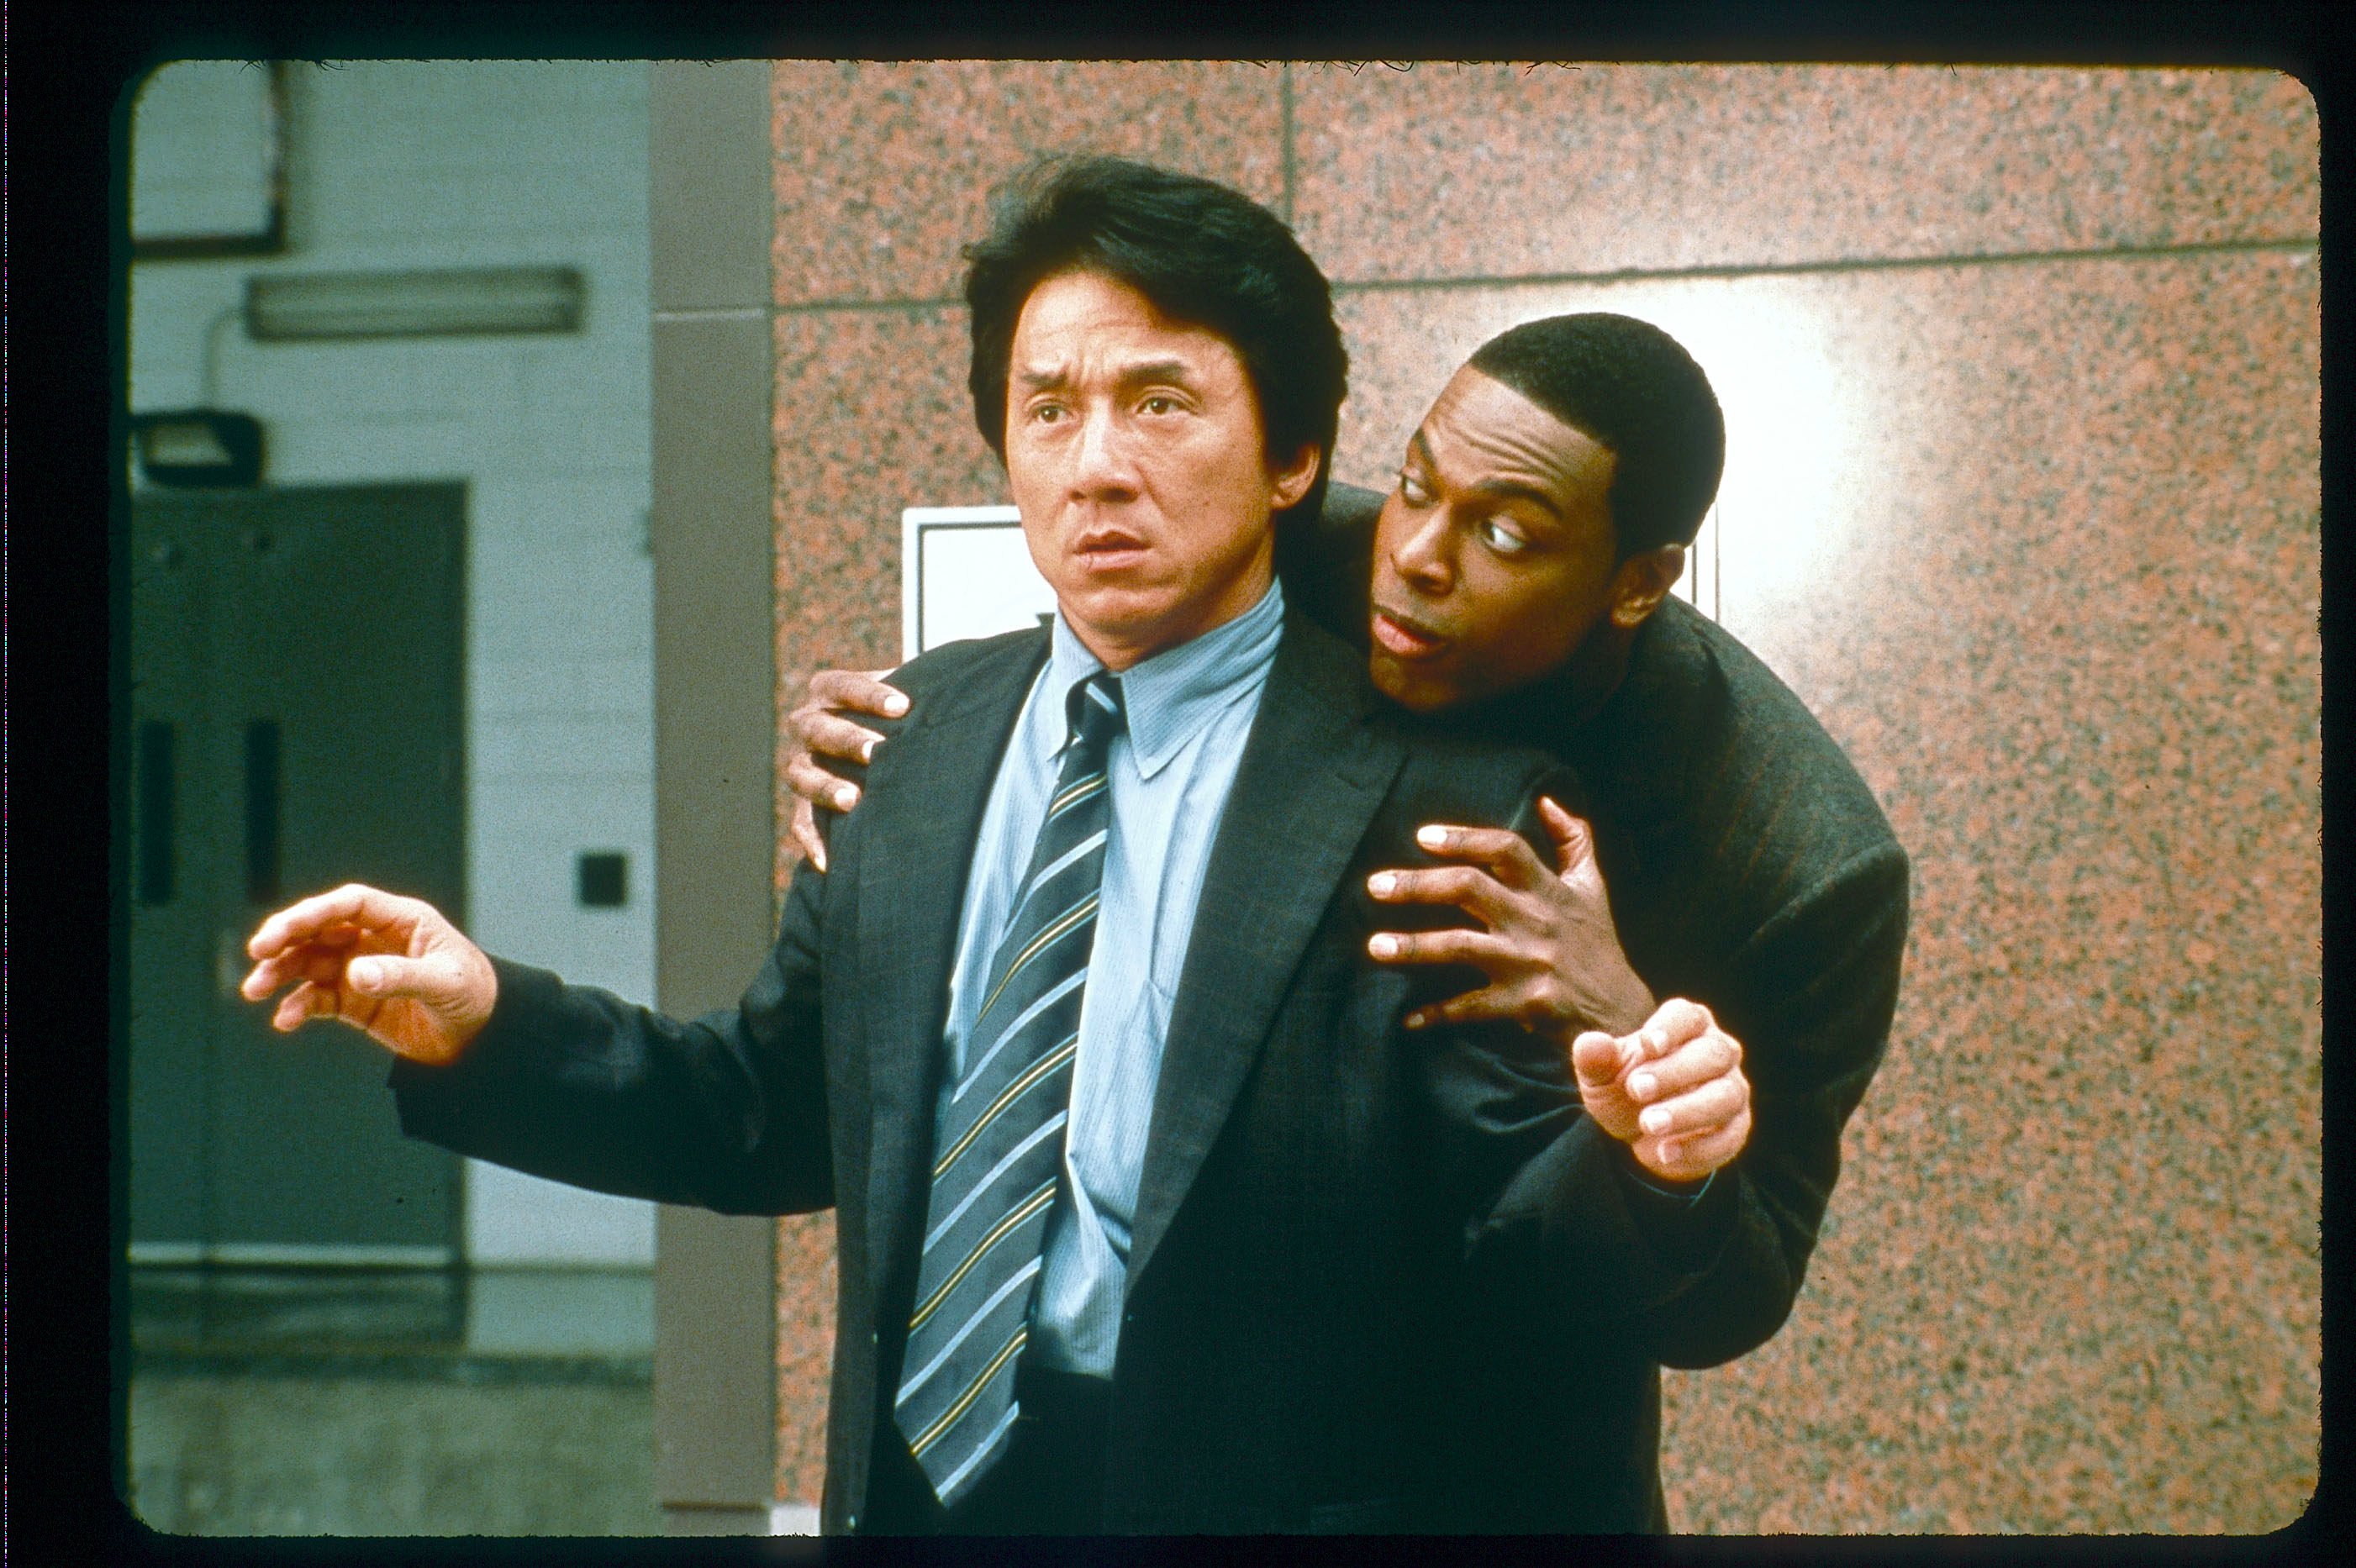 Rush Hour 3' is a lazy way to cash in a third time